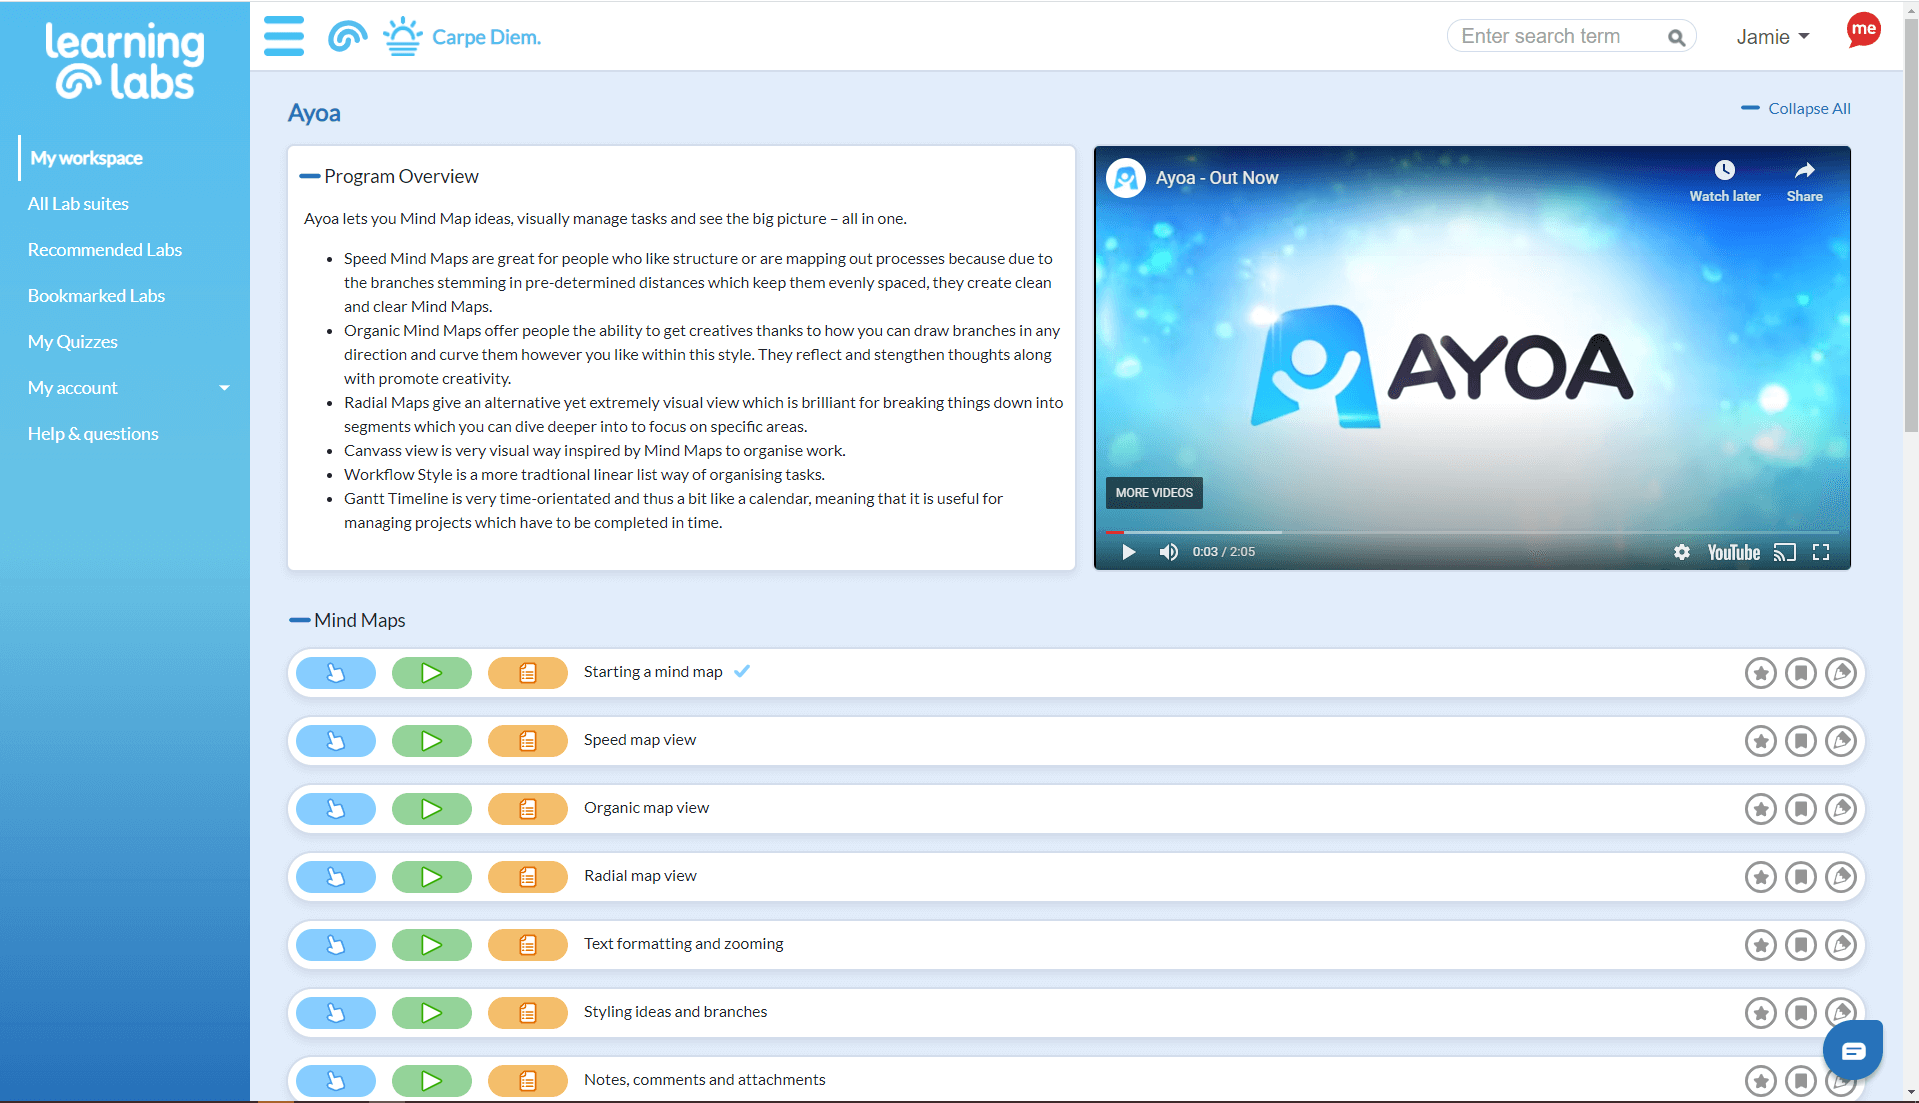 Ayoa lab suite in Learning Labs portal